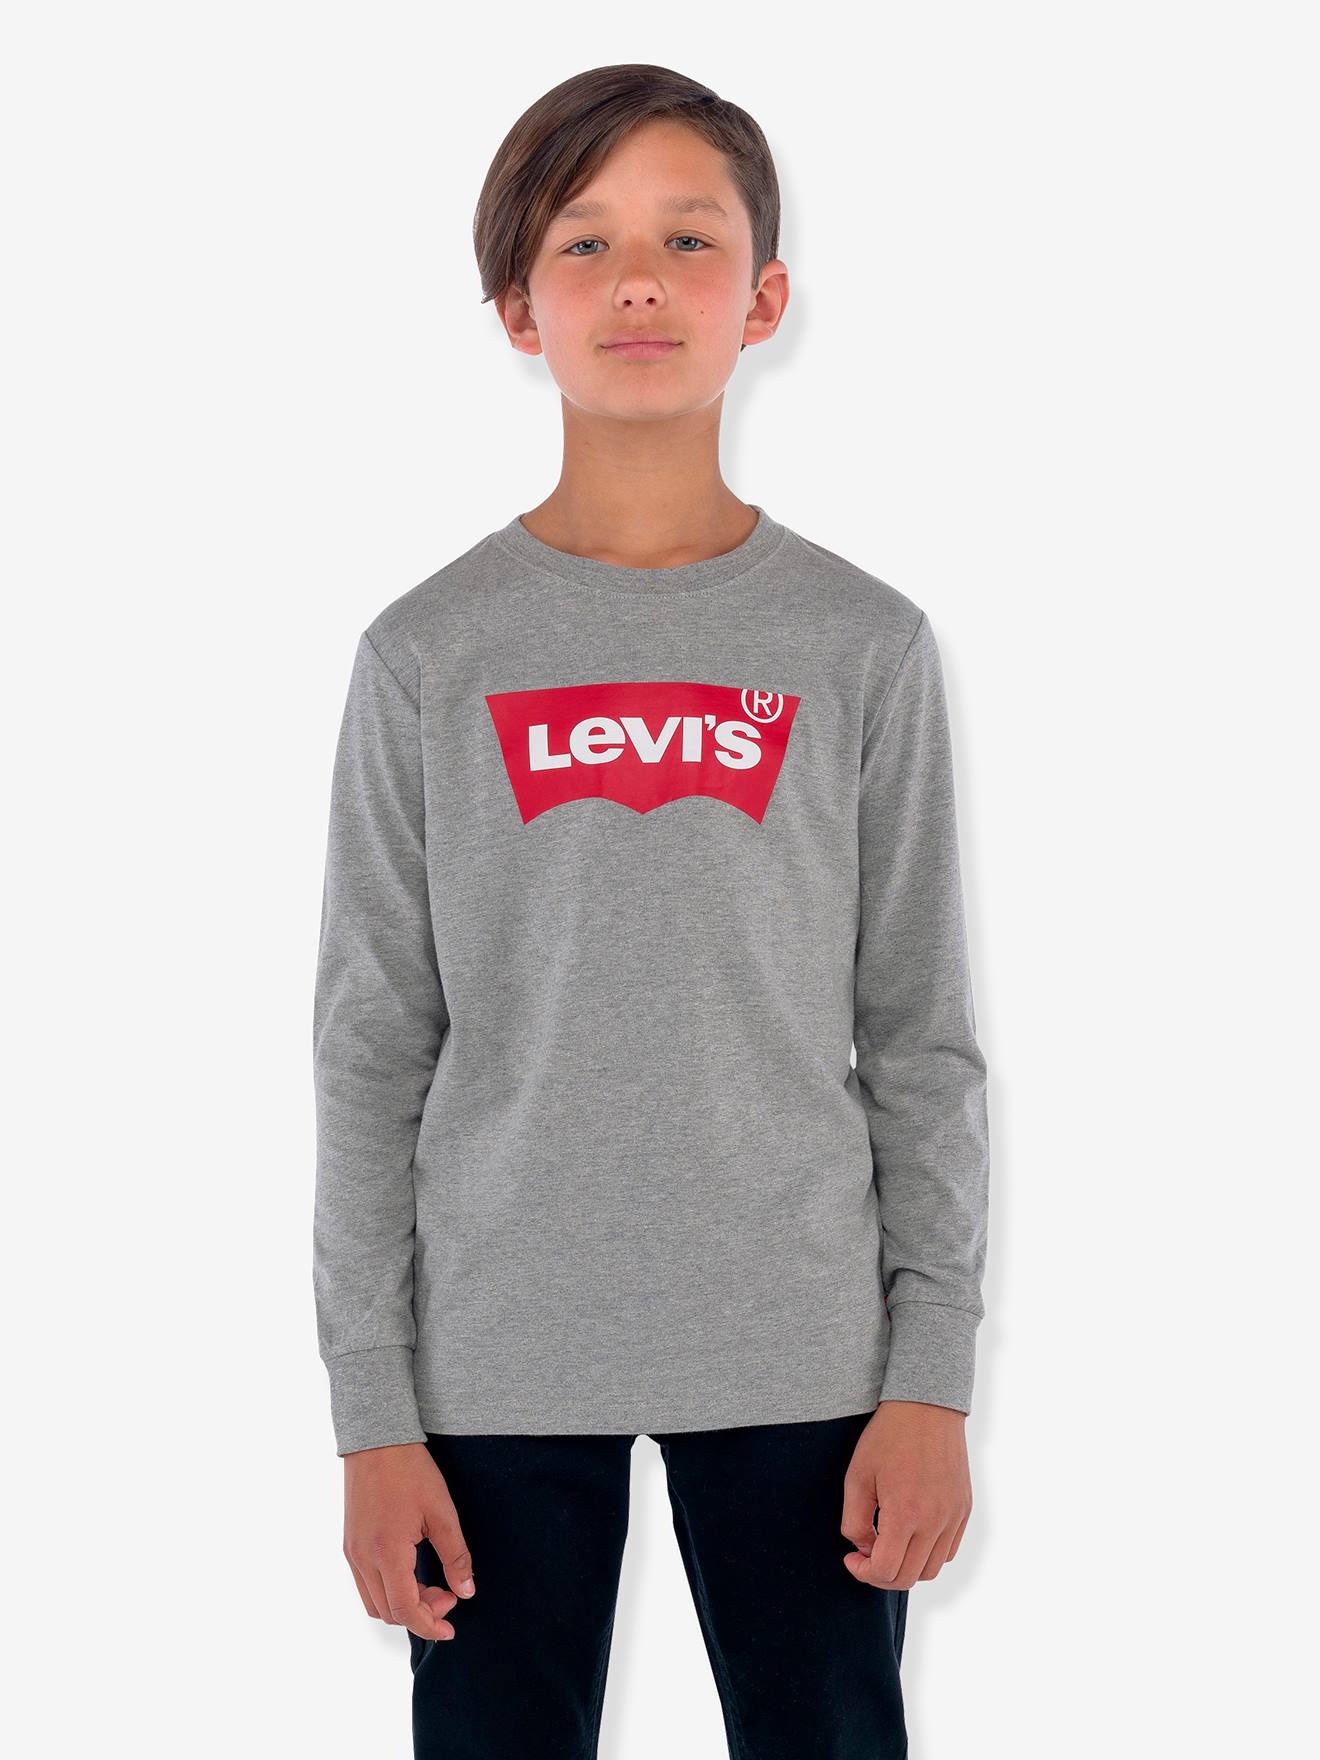 Batwing Top by Levi’s(r) grey